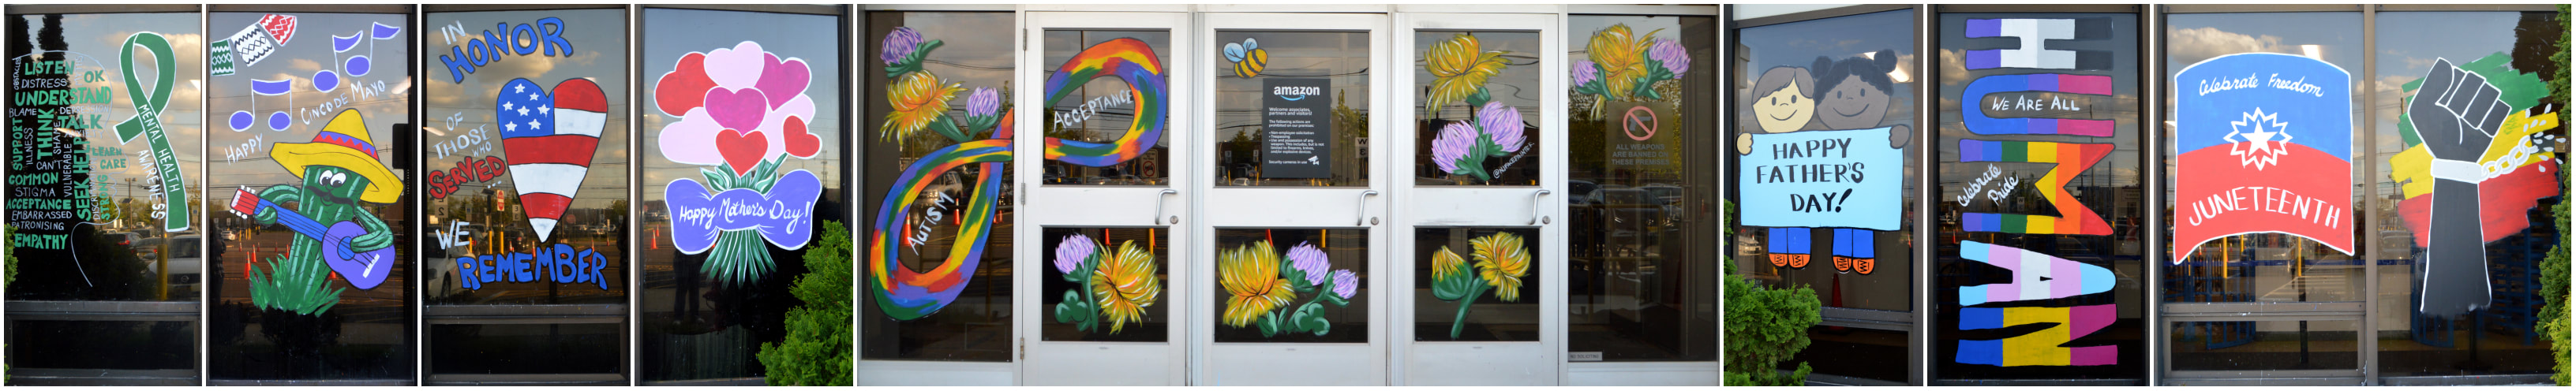 April, May, and June Window Paintings at the EWR5 Amazon Warehouse in Avenel, Middlesex County, NJ, featuring Mental Health Awareness, Cinco de Mayo, Memorial Day, Mother's Day, Autism Acceptance, Spring, Father's Day, Pride Month, and Juneteenth